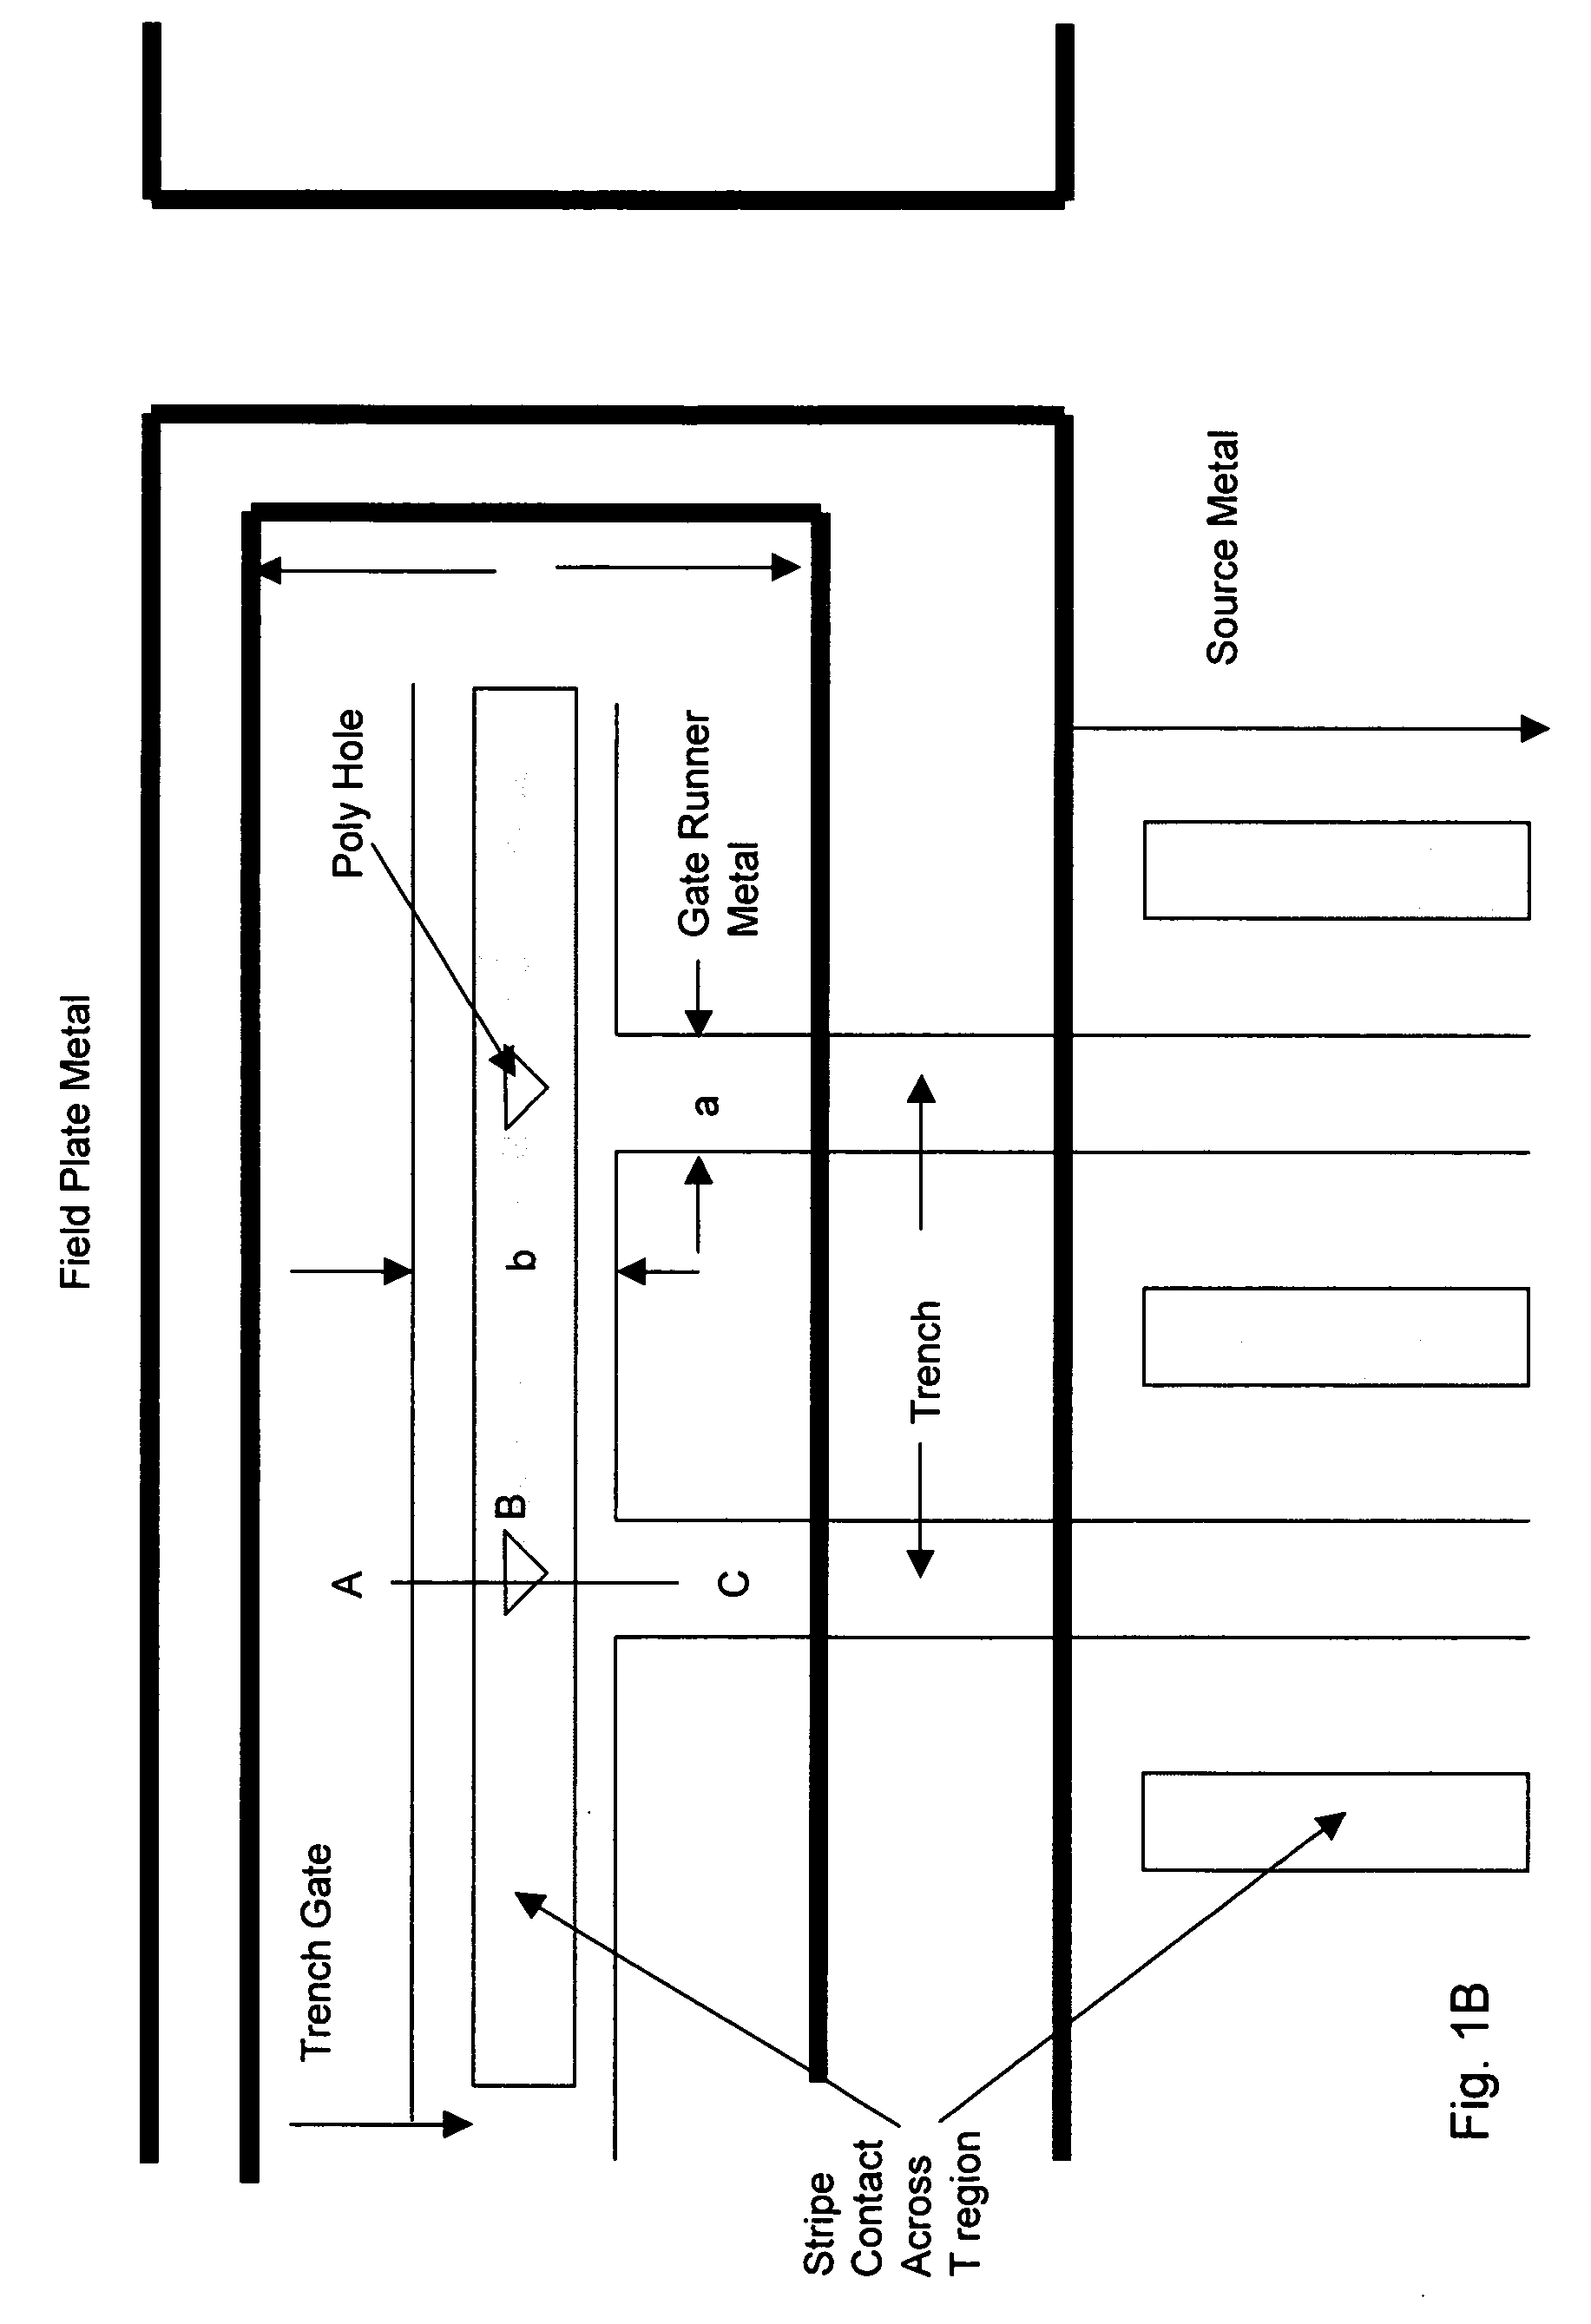 Trenched MOSFET device with contact trenches filled with tungsten plugs